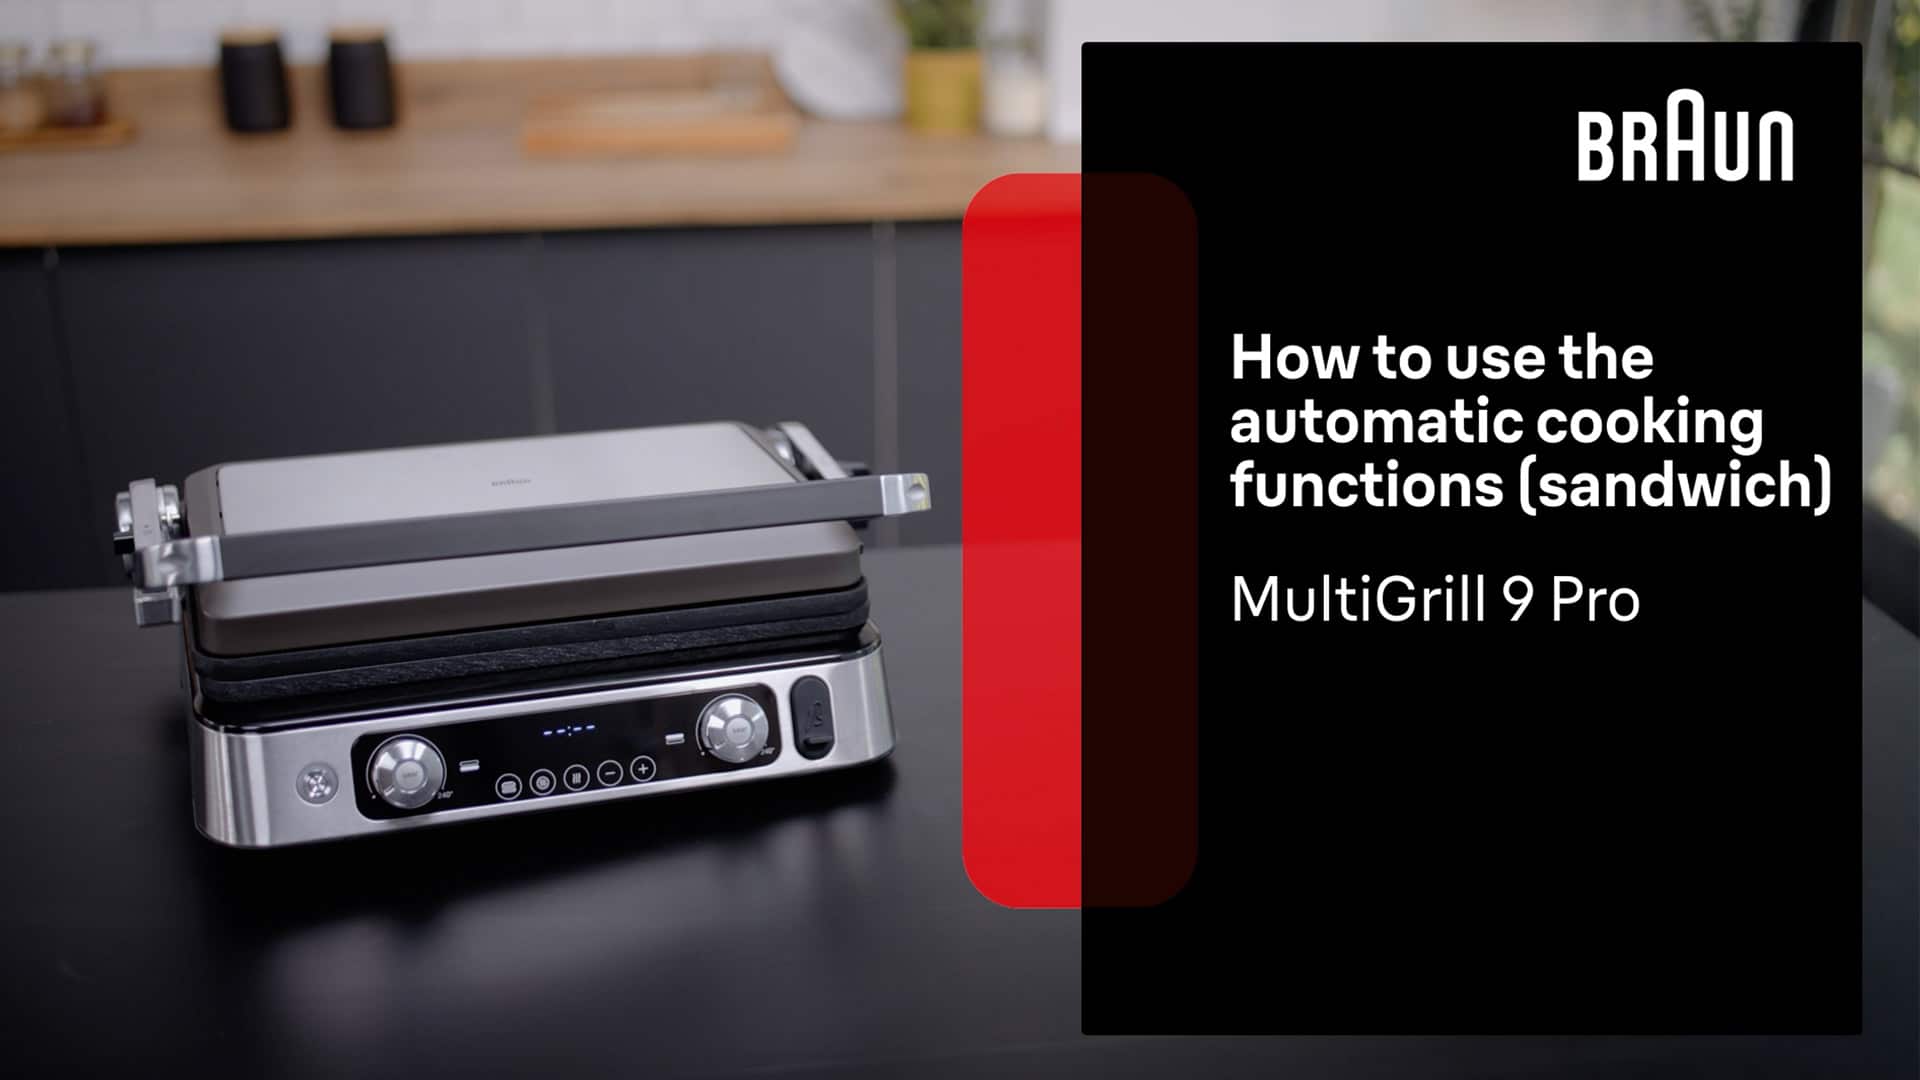 Braun MultiGrill 9 Pro | How to Use the Automatic Cooking Functions Sandwich